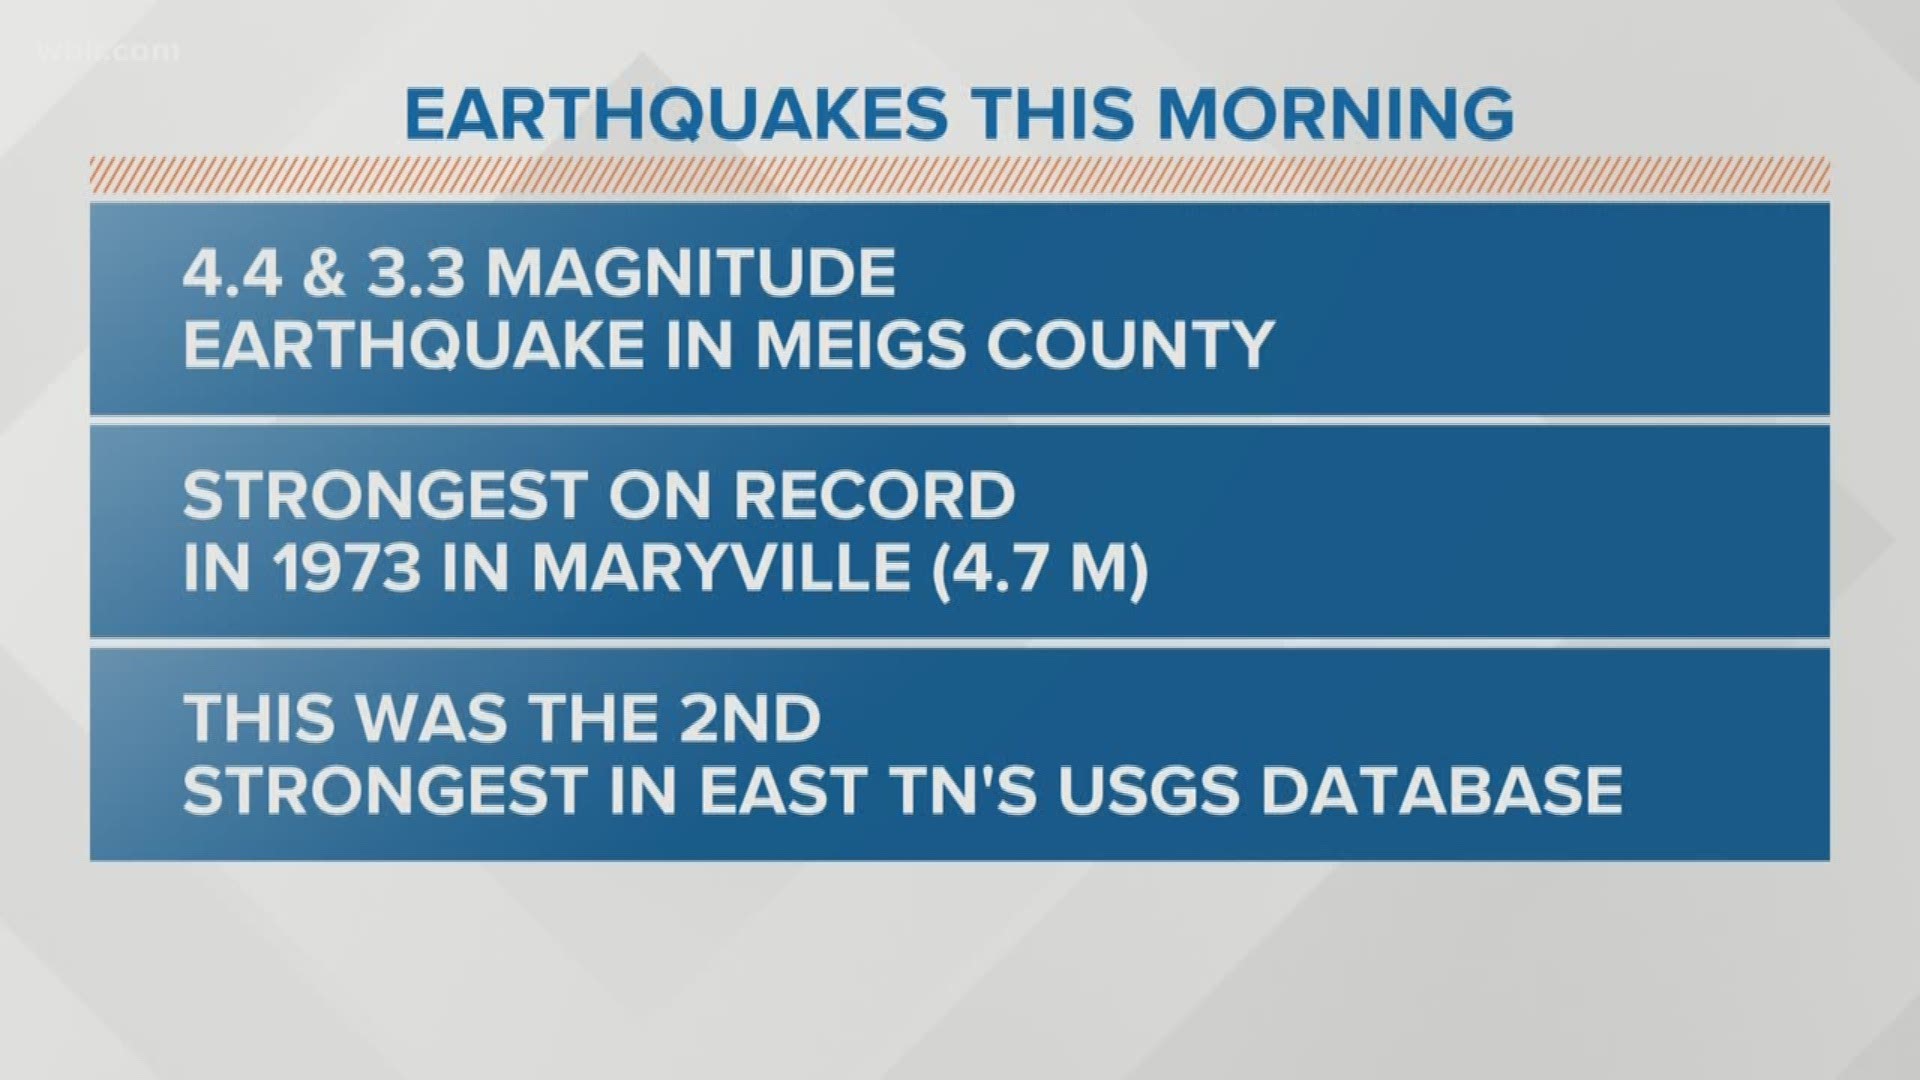 The USGS confirms there was a 4.4 magnitude earthquake followed by a 3.3 magnitude earthquake near Decatur, Tennessee on Wednesday morning.